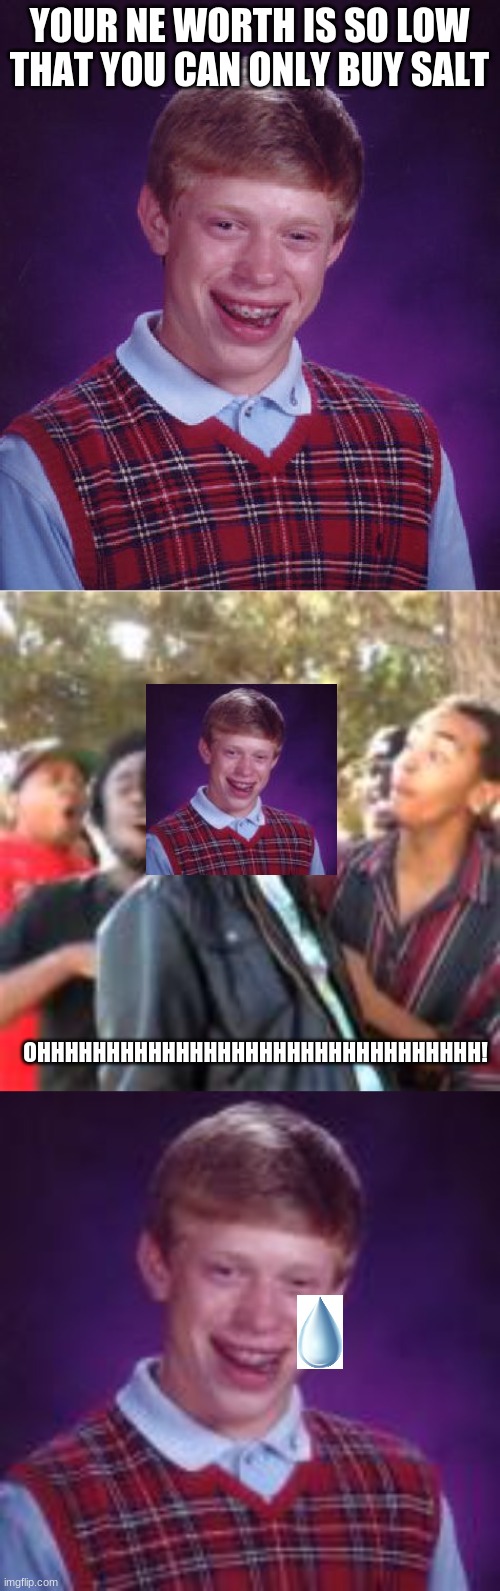 bad luck brian gets roasted | YOUR NE WORTH IS SO LOW THAT YOU CAN ONLY BUY SALT OHHHHHHHHHHHHHHHHHHHHHHHHHHHHHHHH! | image tagged in memes,bad luck brian | made w/ Imgflip meme maker